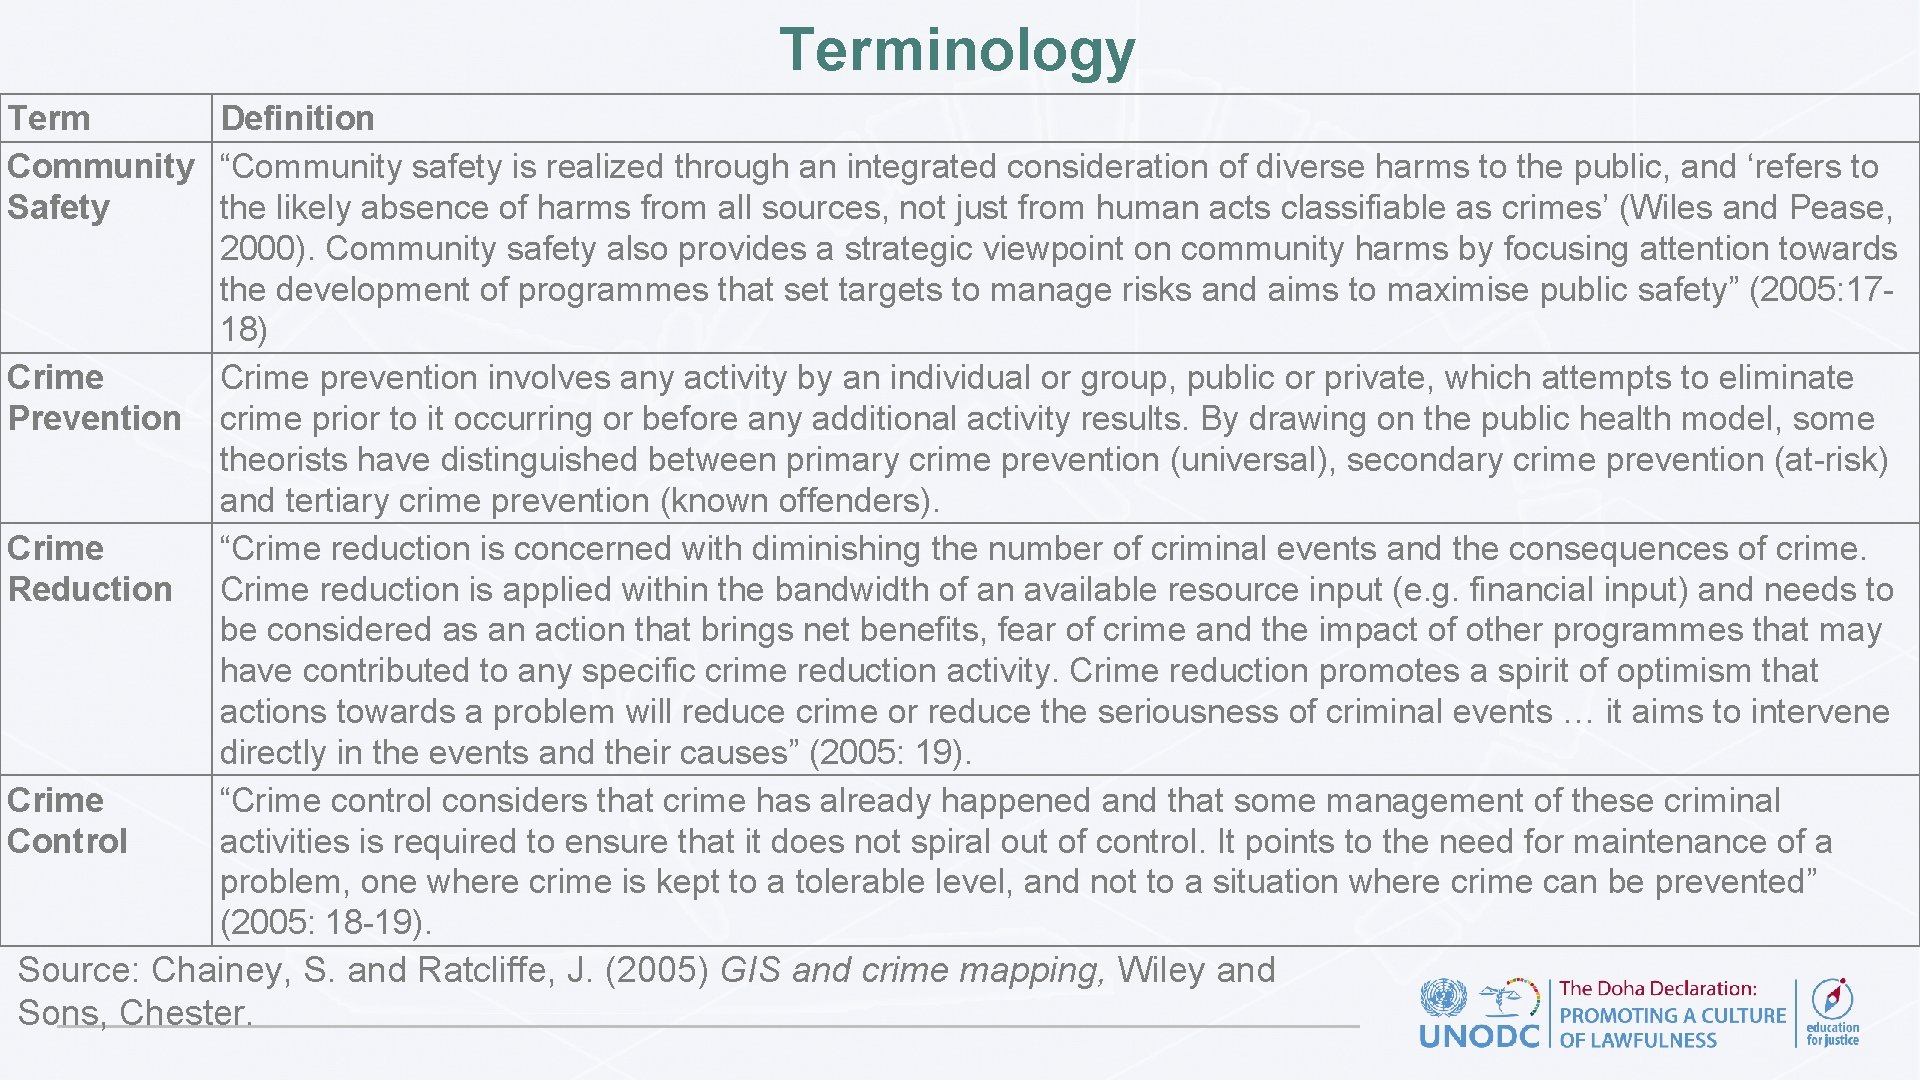 Terminology Term Definition Community “Community safety is realized through an integrated consideration of diverse